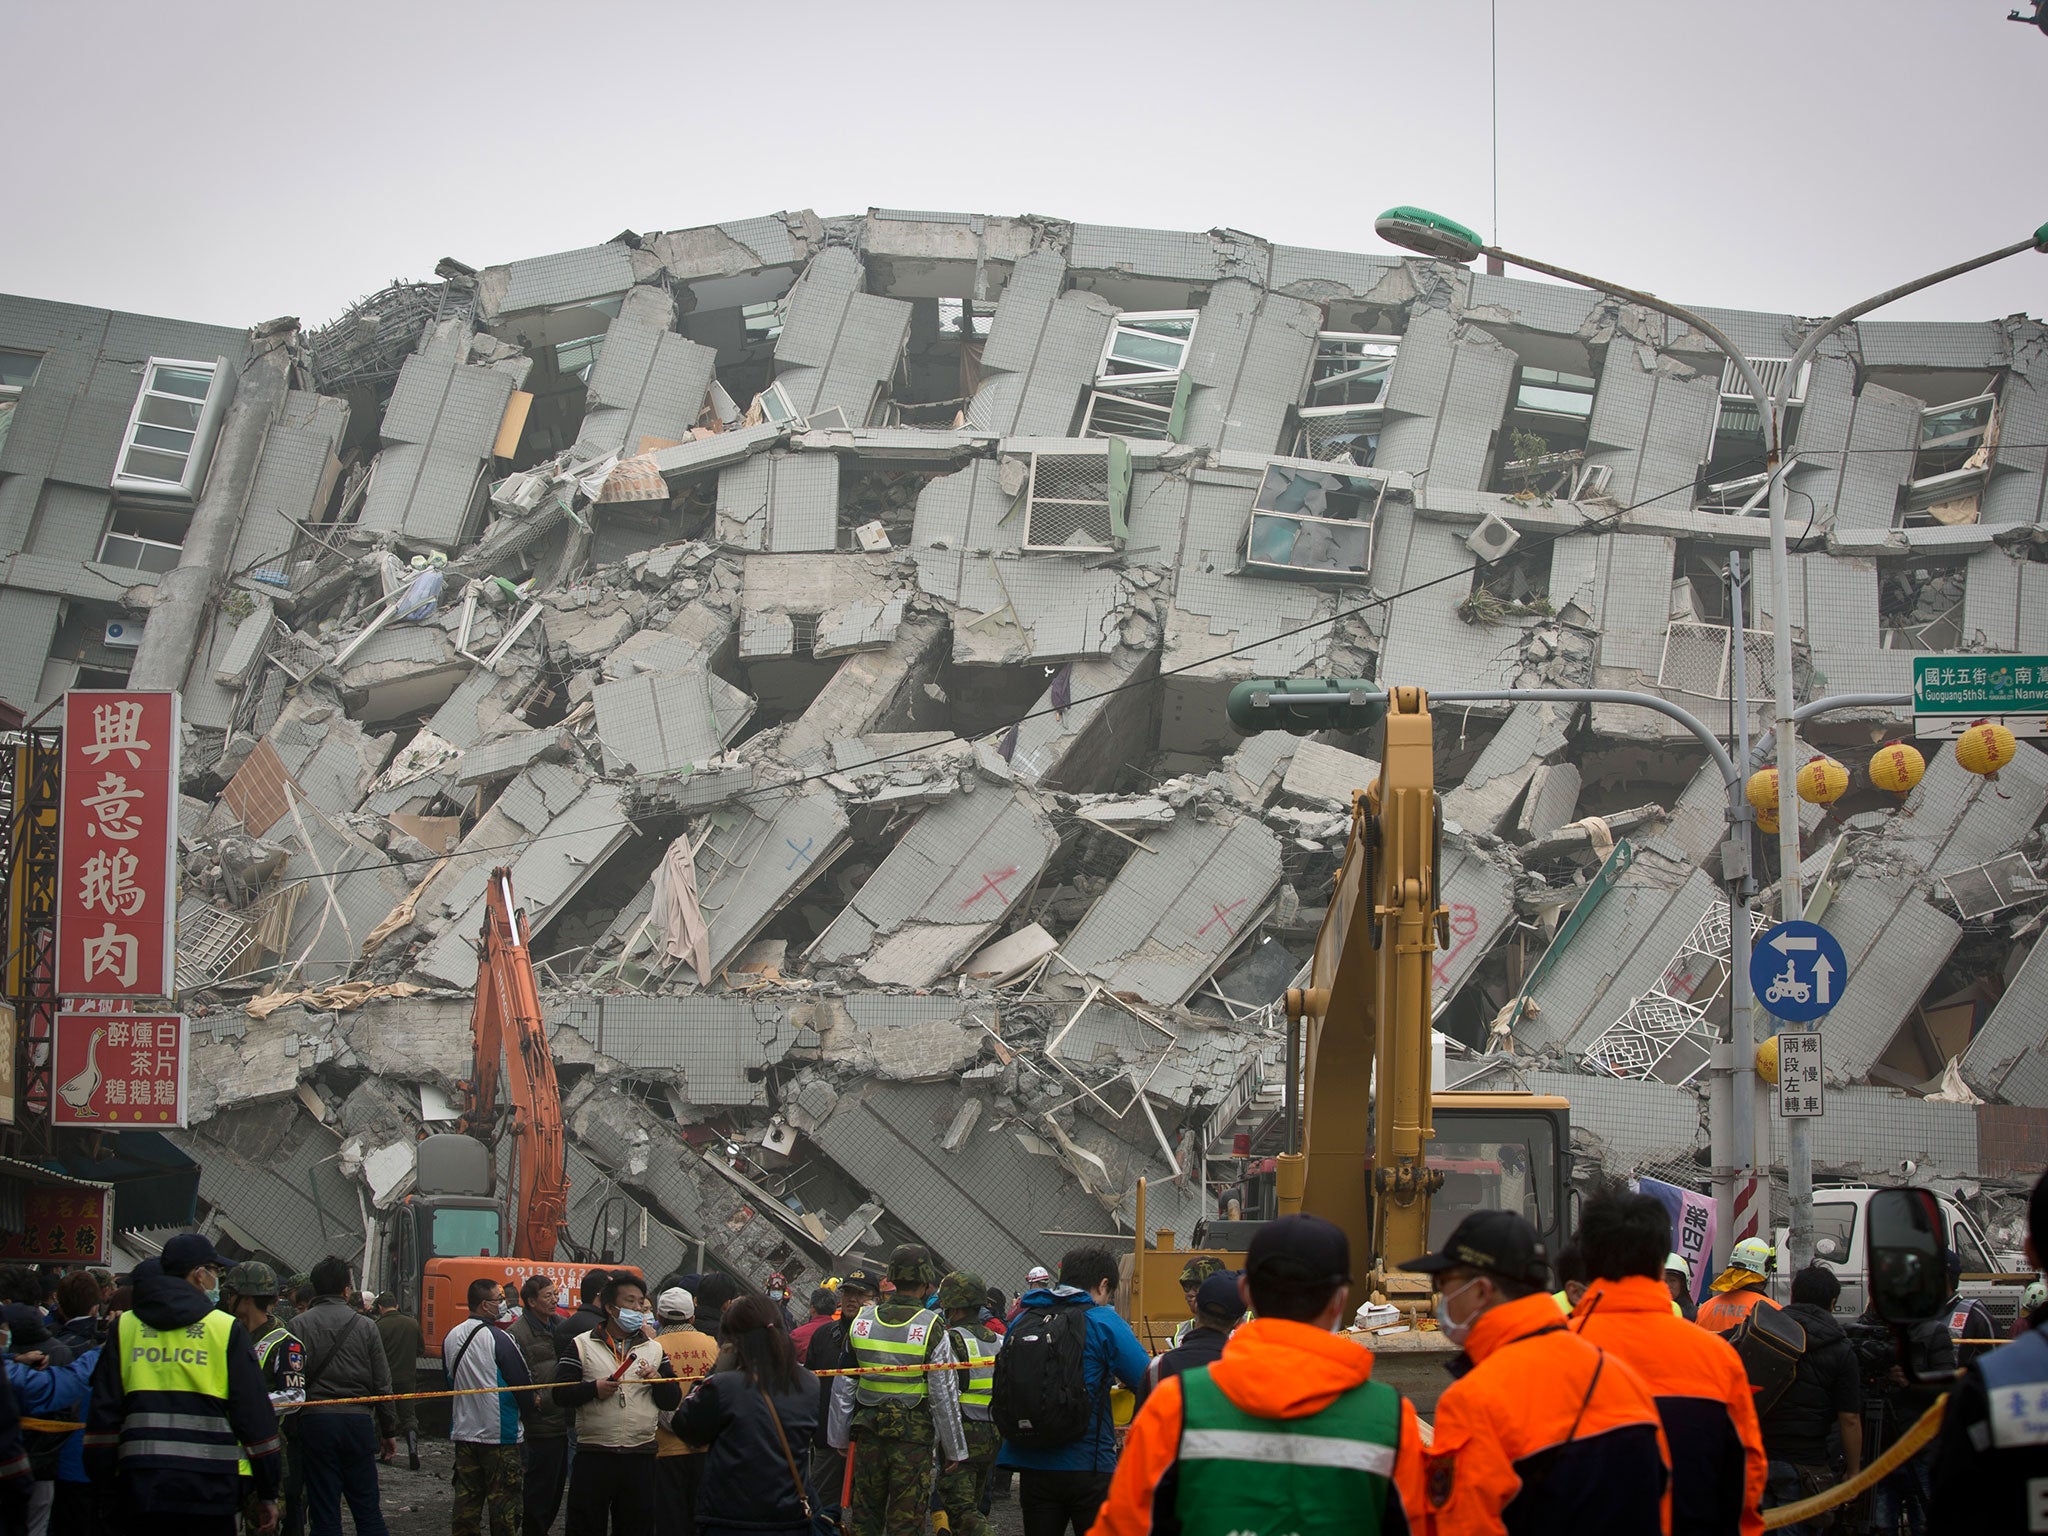 Rescue personnel search for survivors at the site of a collapsed building on 6 February, 2016 in Tainan, Taiwan